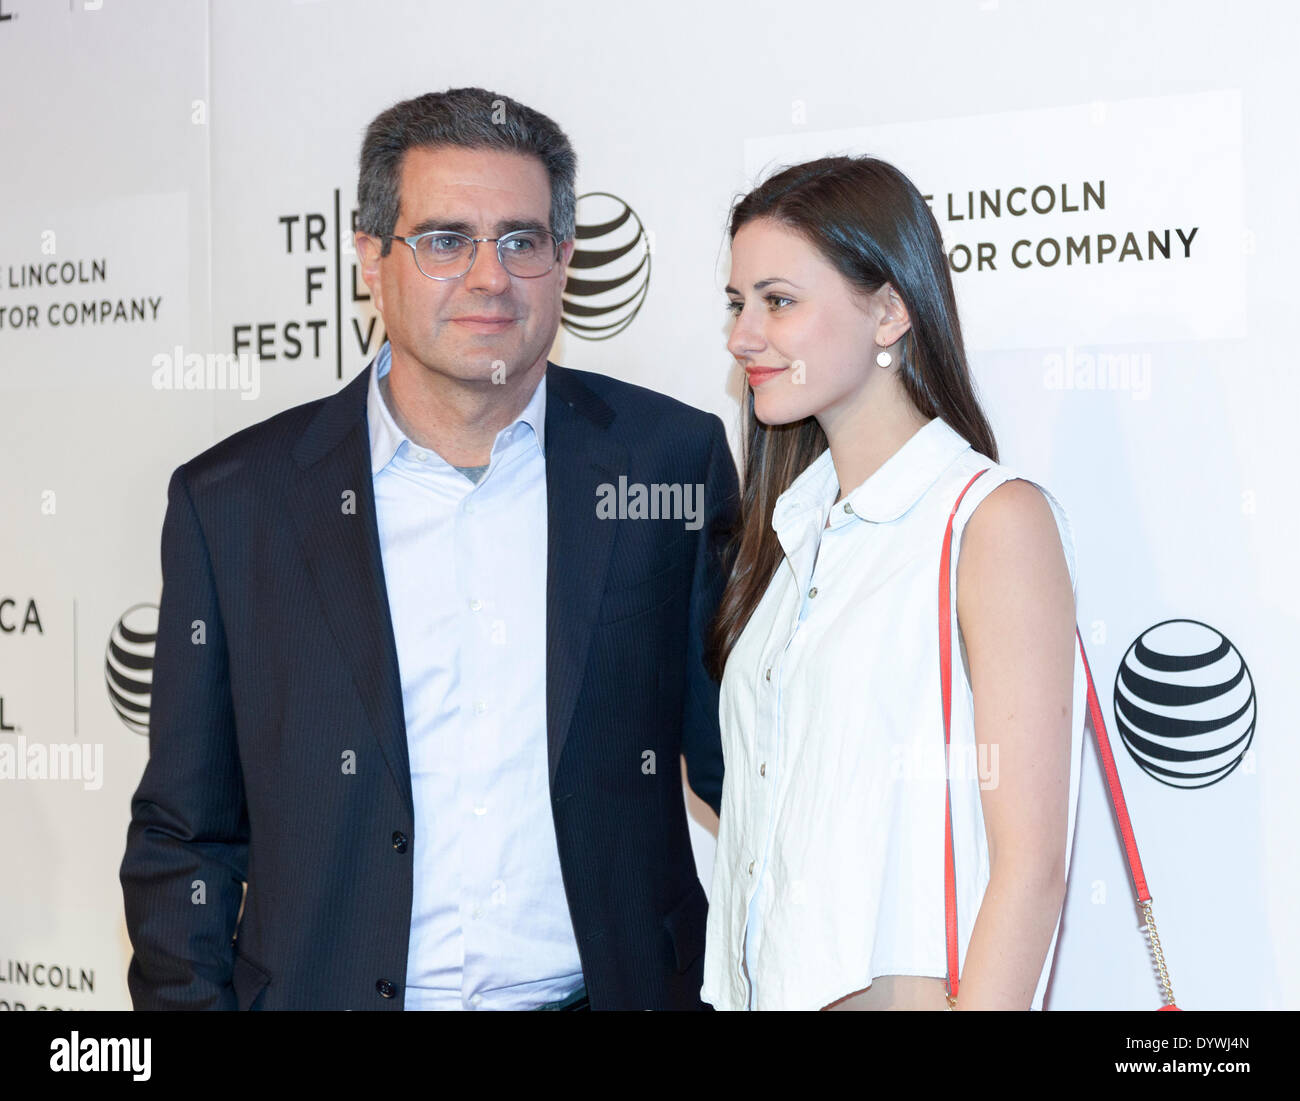 New York, NY, USA - April 24, 2014: Producer Michael Nozik and Actress Remy Nozik attend the premiere of 'Third Person' during the 2014 Tribeca Film Festival at BMCC Tribeca PAC in New York City Credit:  Sam Aronov/Alamy Live News Stock Photo